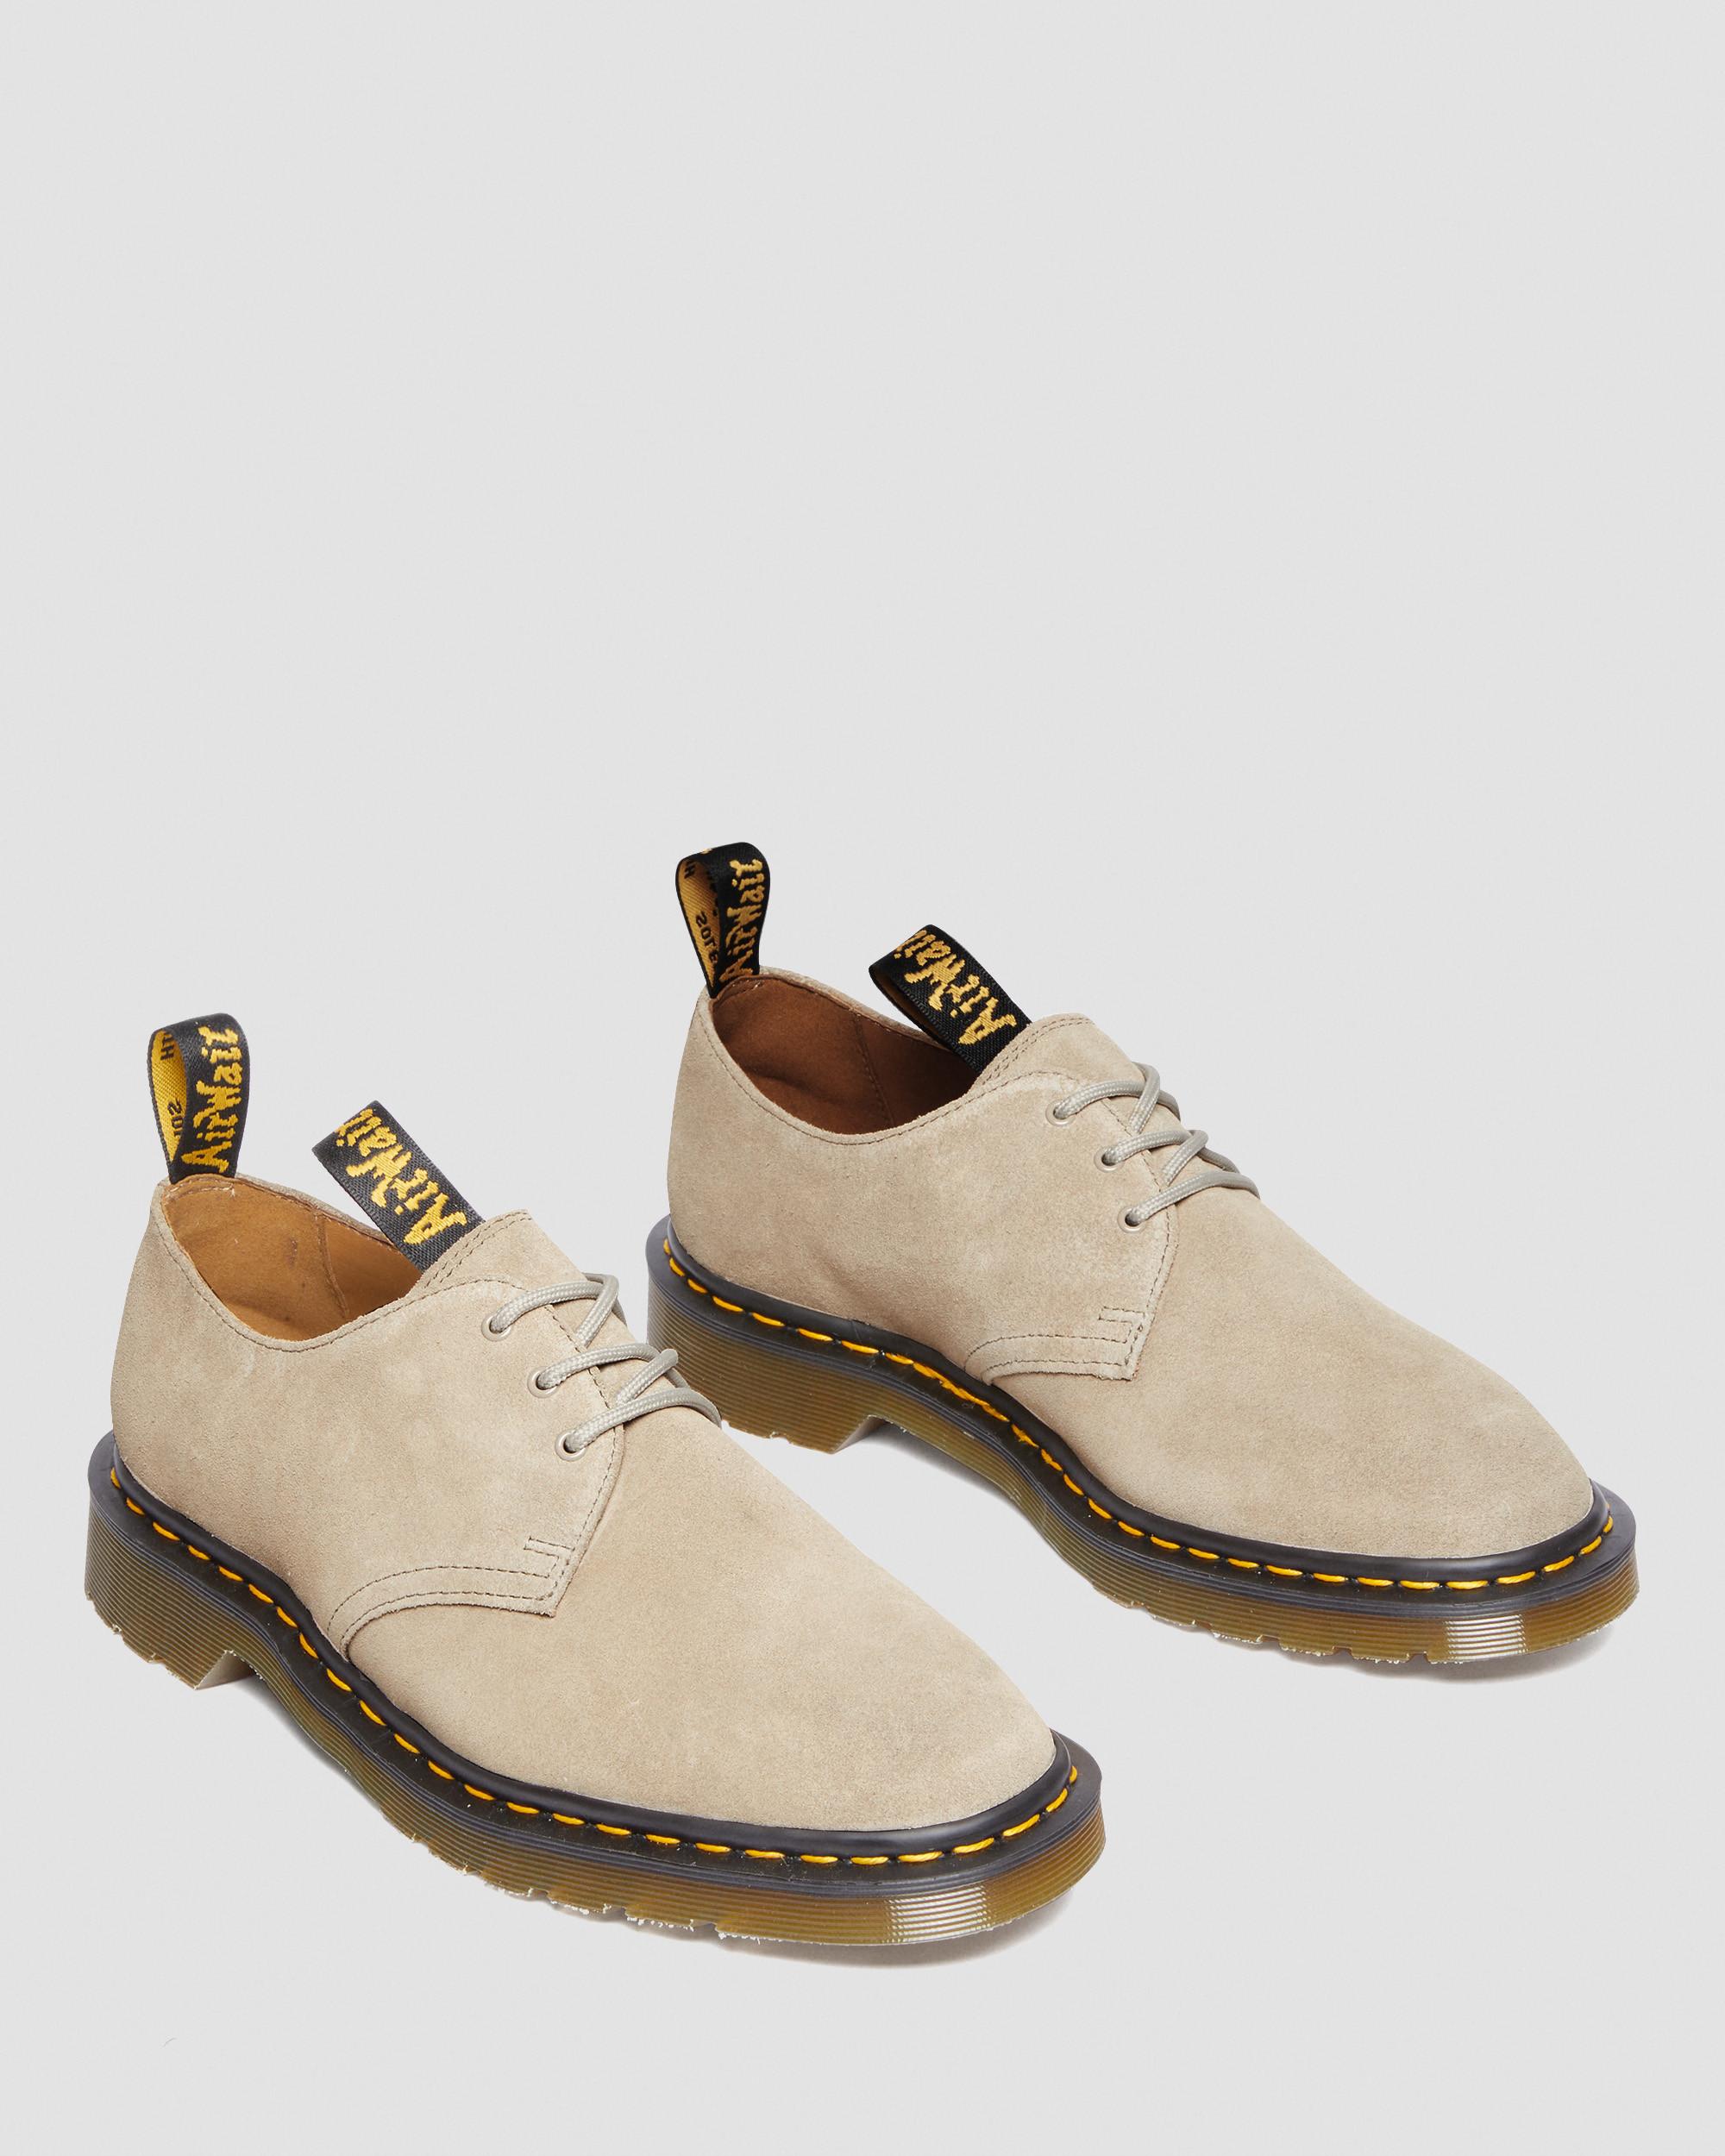 1461 Engineered Garments Suede Oxford Shoes     1461 Engineered Garments Suede Oxford Shoes   Dr. Martens